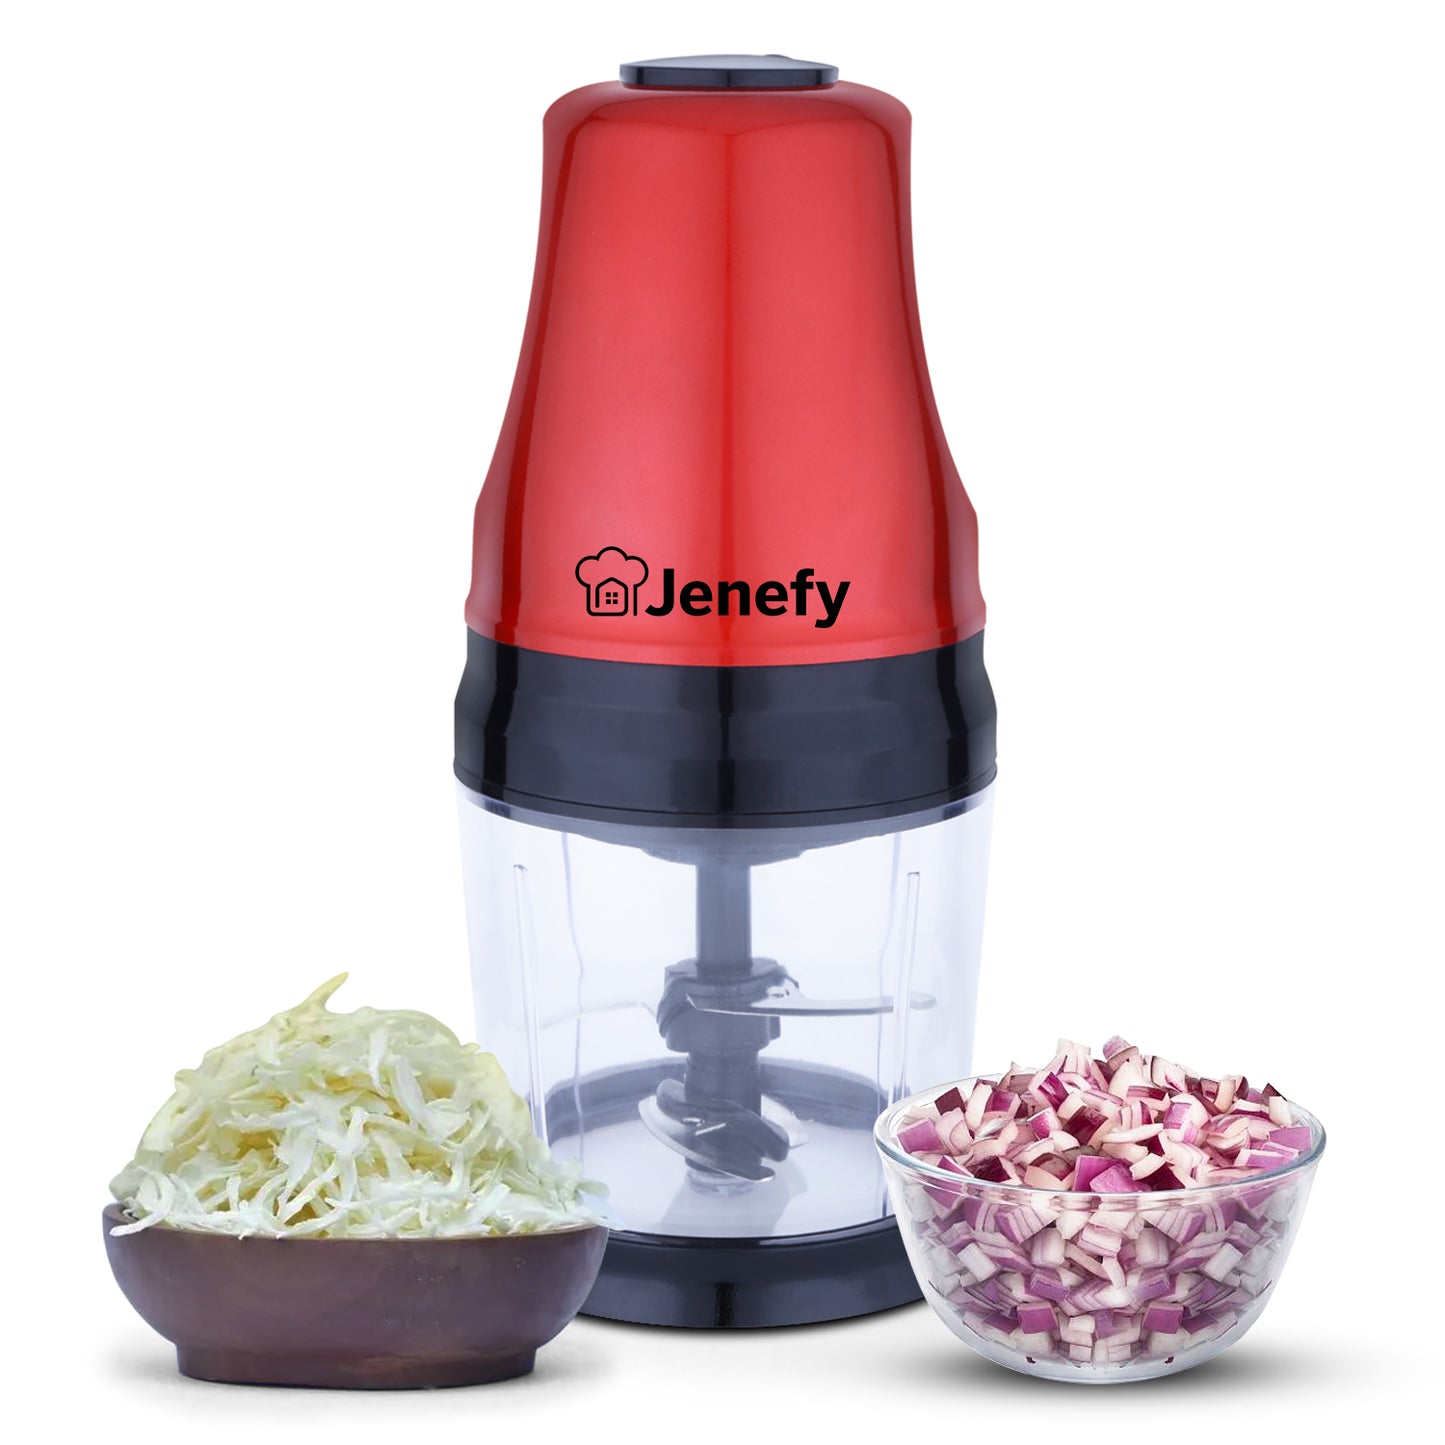 Jenefy Electric Vegetable Chopper for Kitchen 275 Watts Copper Motor 500 ml Bowl For Chop Mince Puree & Whisk 4 Bi Level Stainless steel Blade for Chopping Vegetable and Fruits